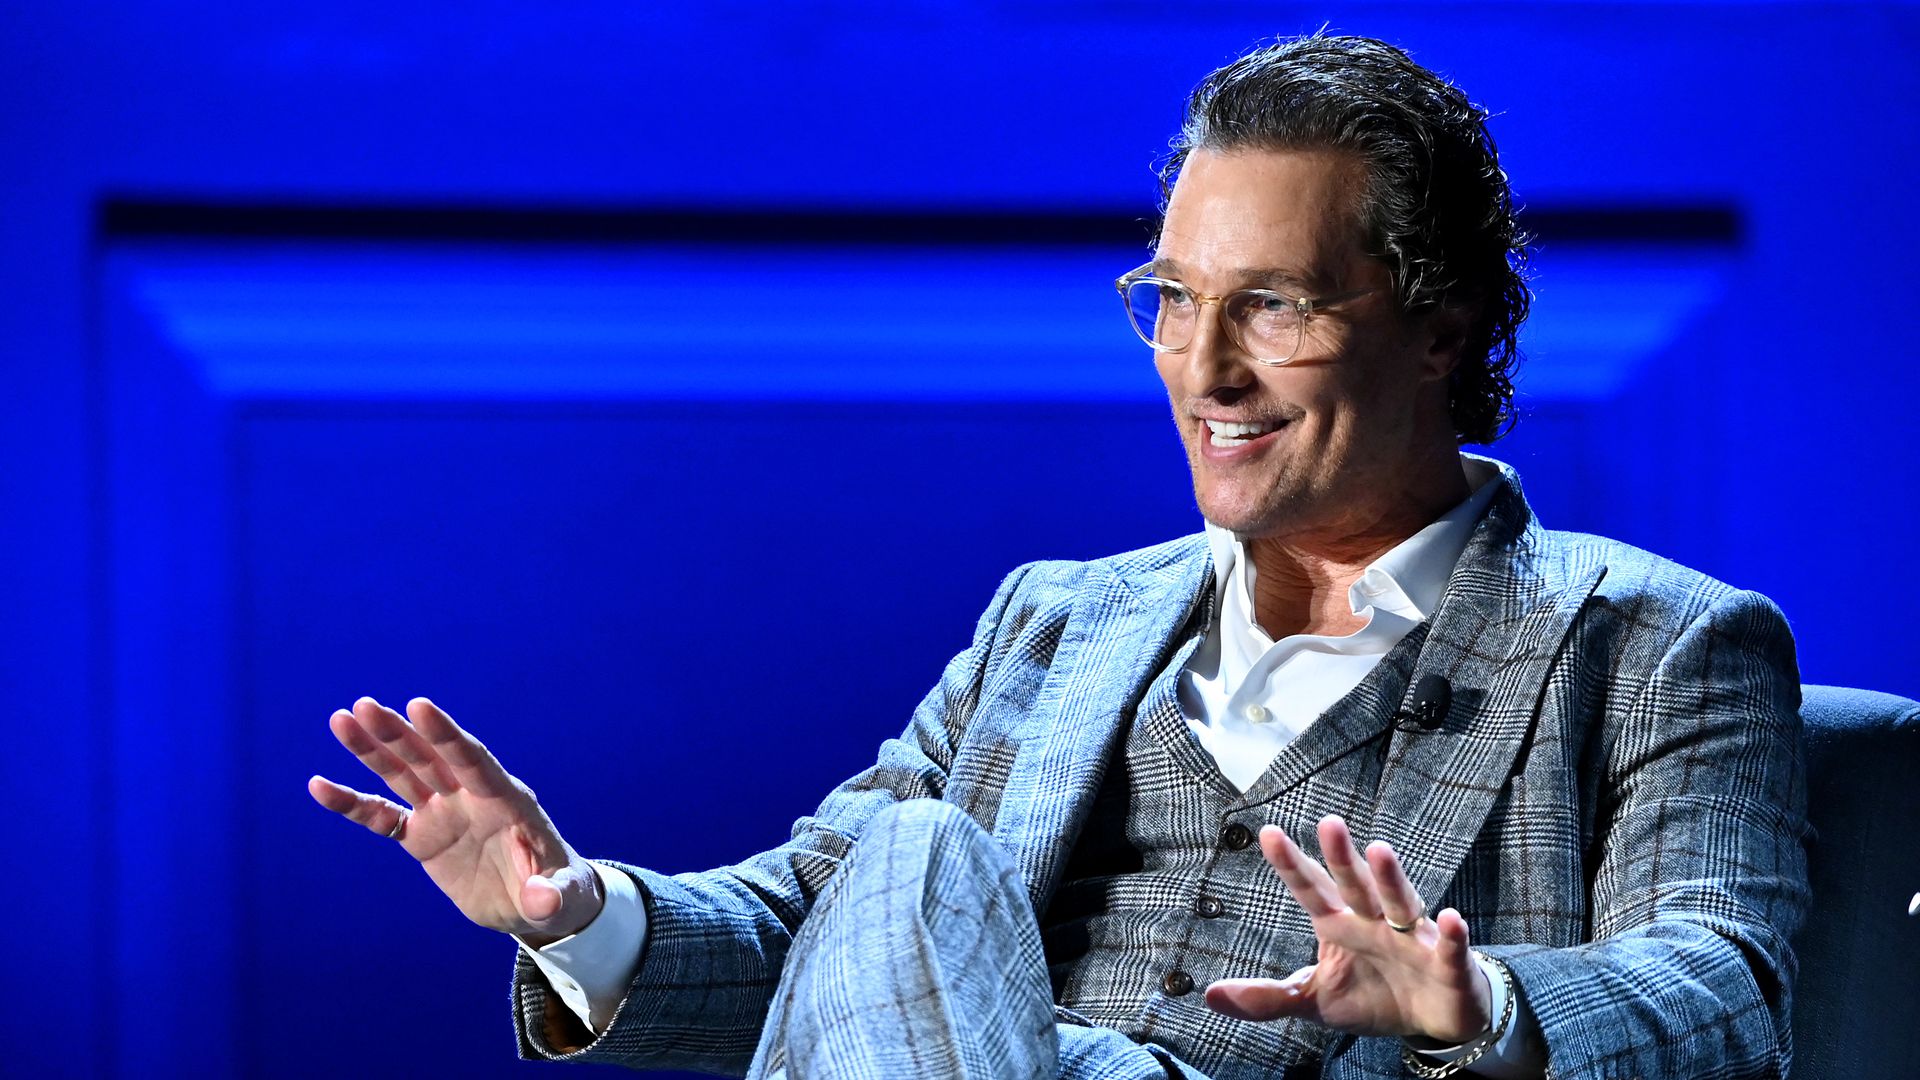 Matthew McConaughey speaks onstage during HISTORYTalks Leadership & Legacy presented by HISTORY at Carnegie Hall on February 29, 2020 in New York City.